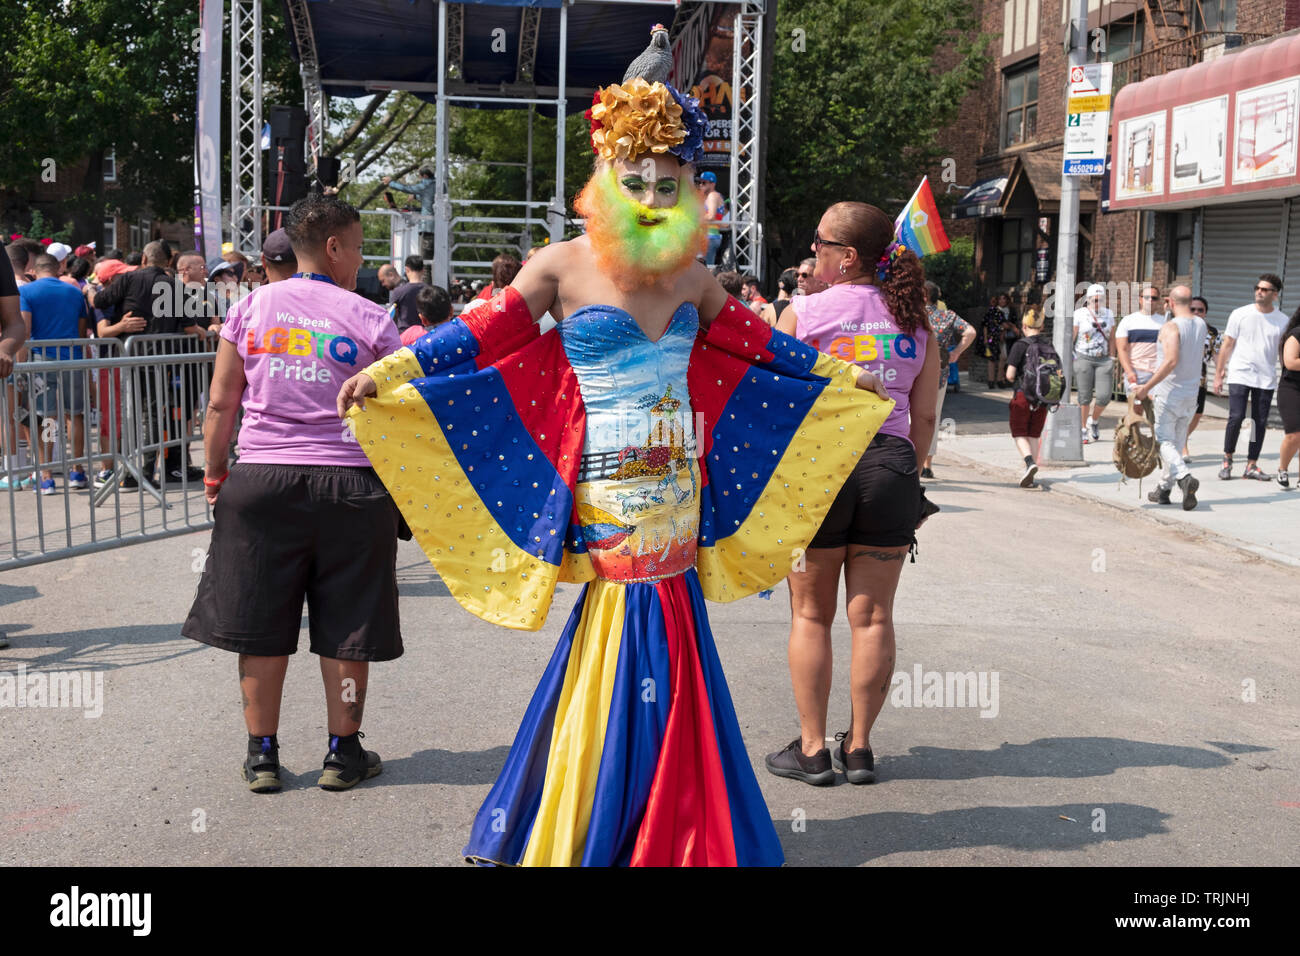 A man in drag with a very colorful costume at the 2019 Queens Pride Parade in Jackson Heights, Queens, New York City. Stock Photo